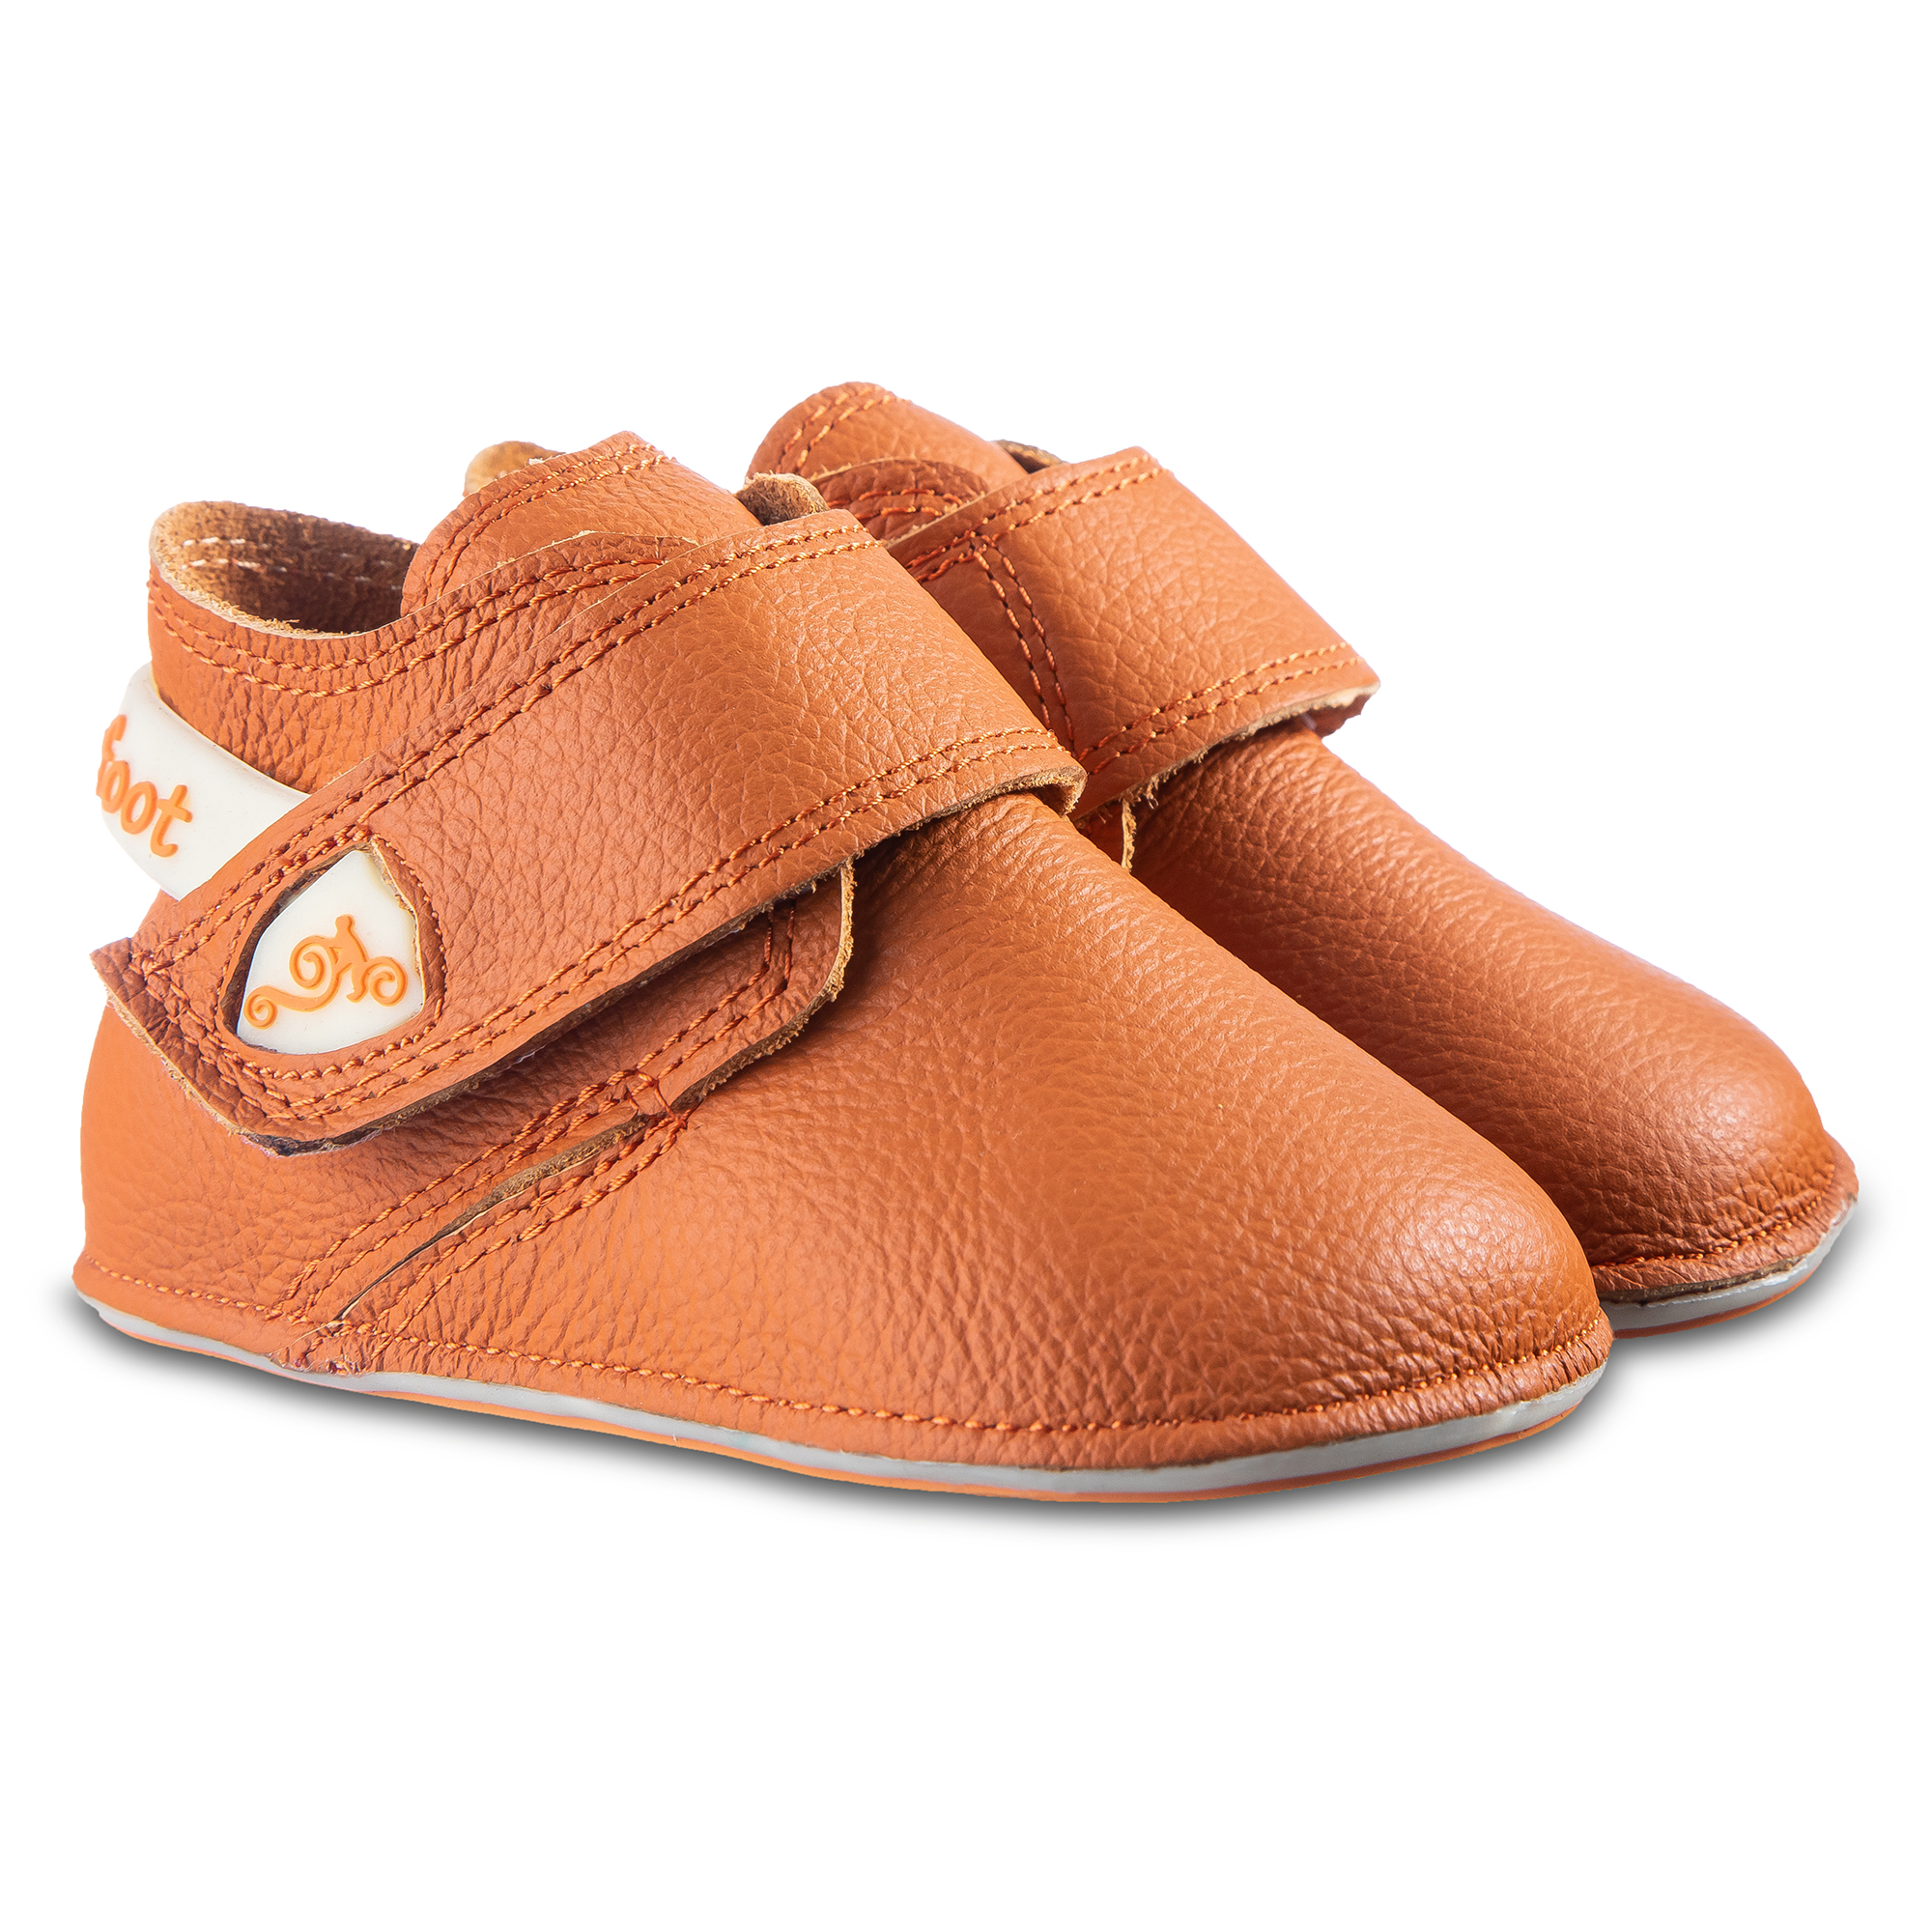 Barefoot Pre-Walkers - Moxy Baby White